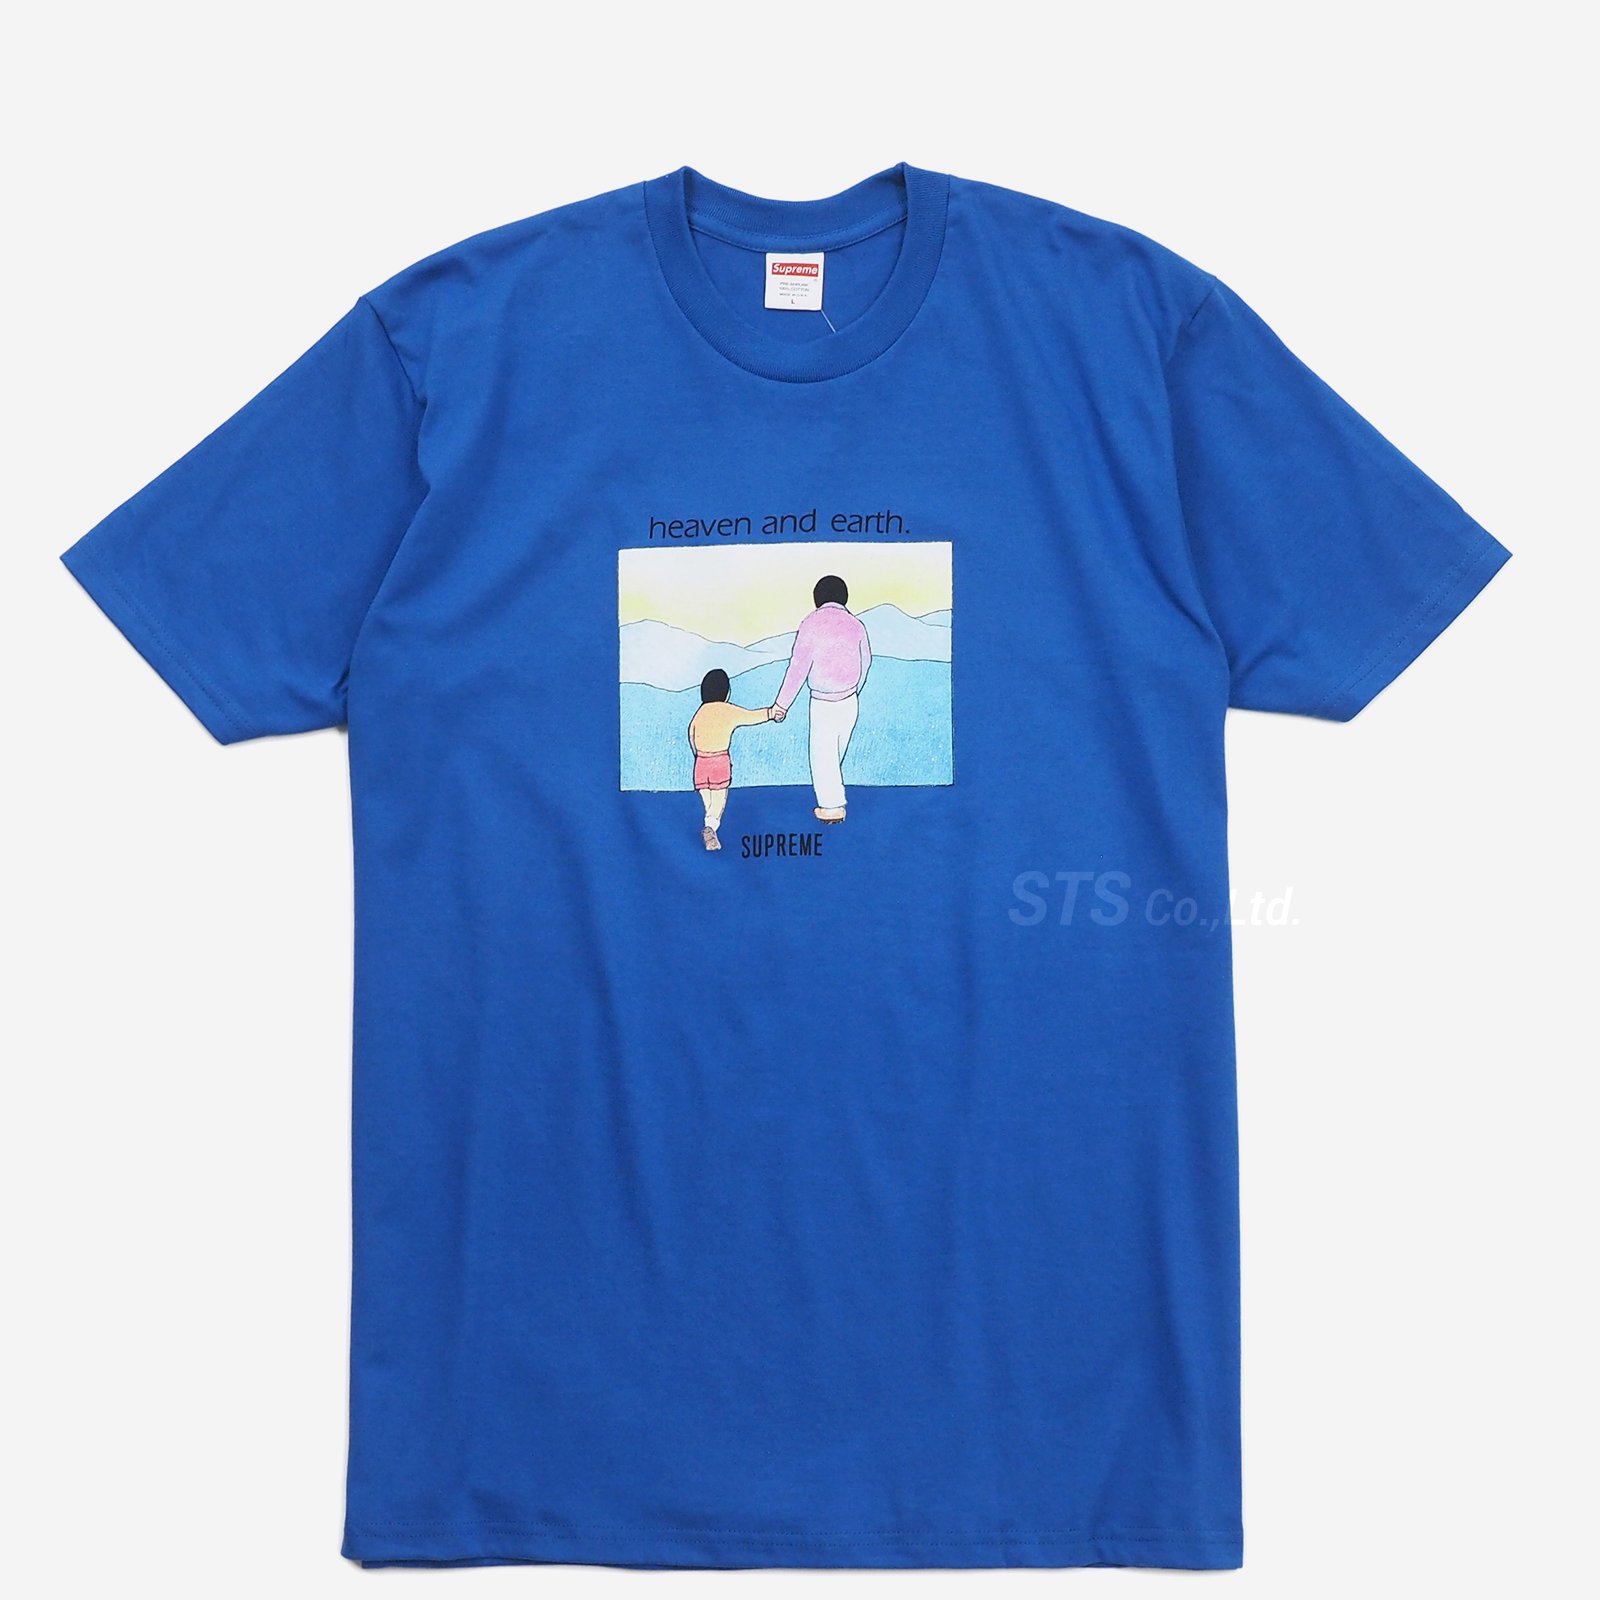 Supreme - Heaven and Earth Tee - ParkSIDER